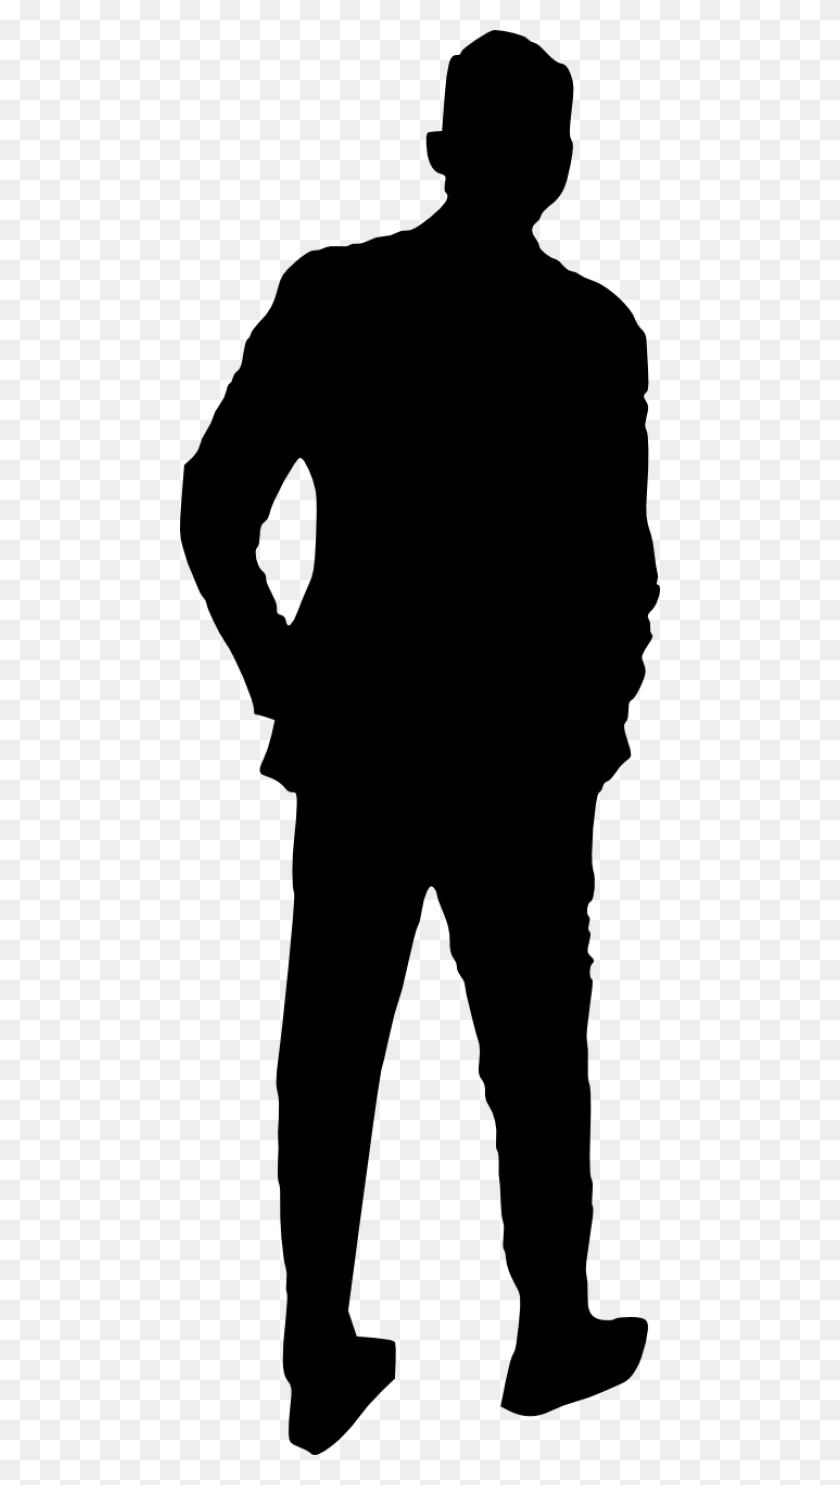 Man Standing Silhouette Png - Silhouette Man PNG – Stunning free ...